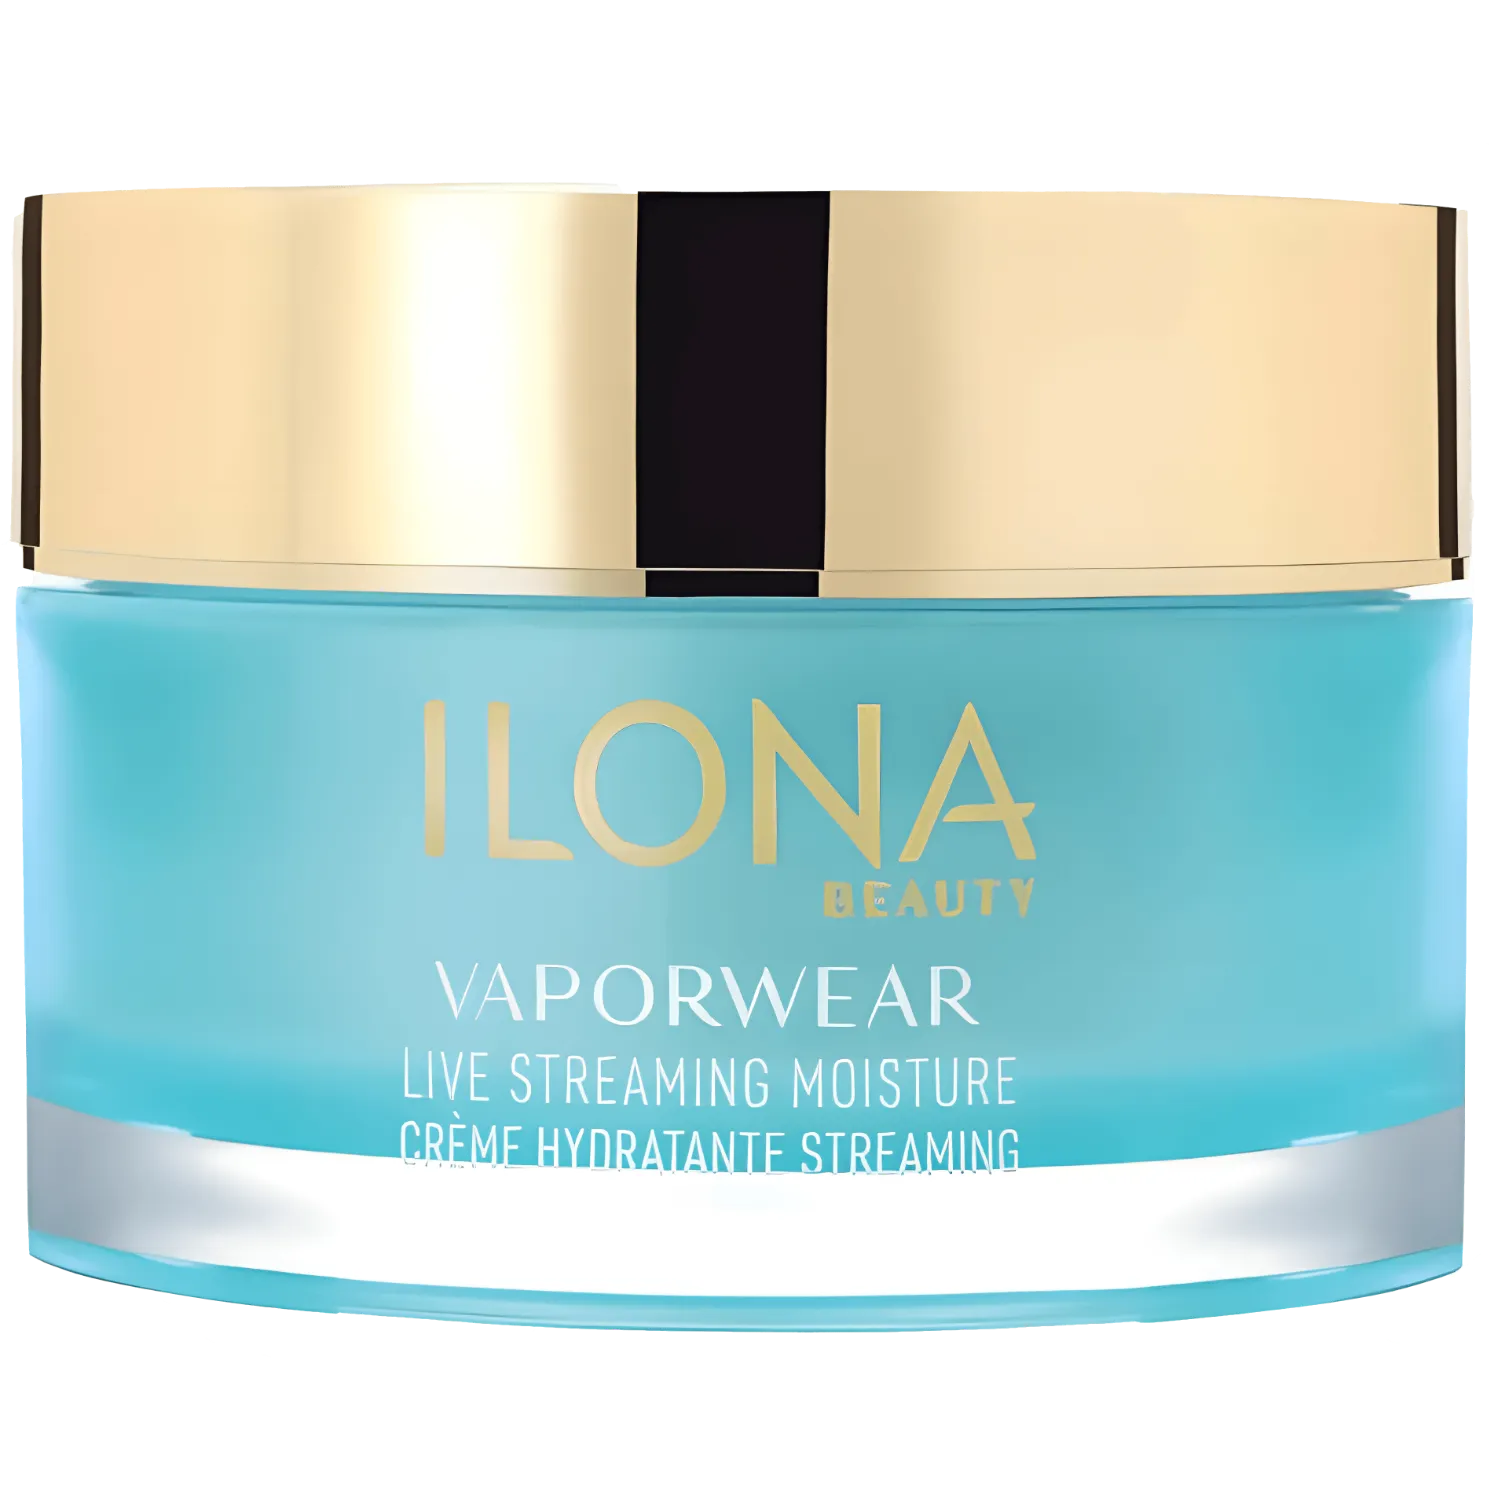 Free Ilona Beauty Cleansing Product